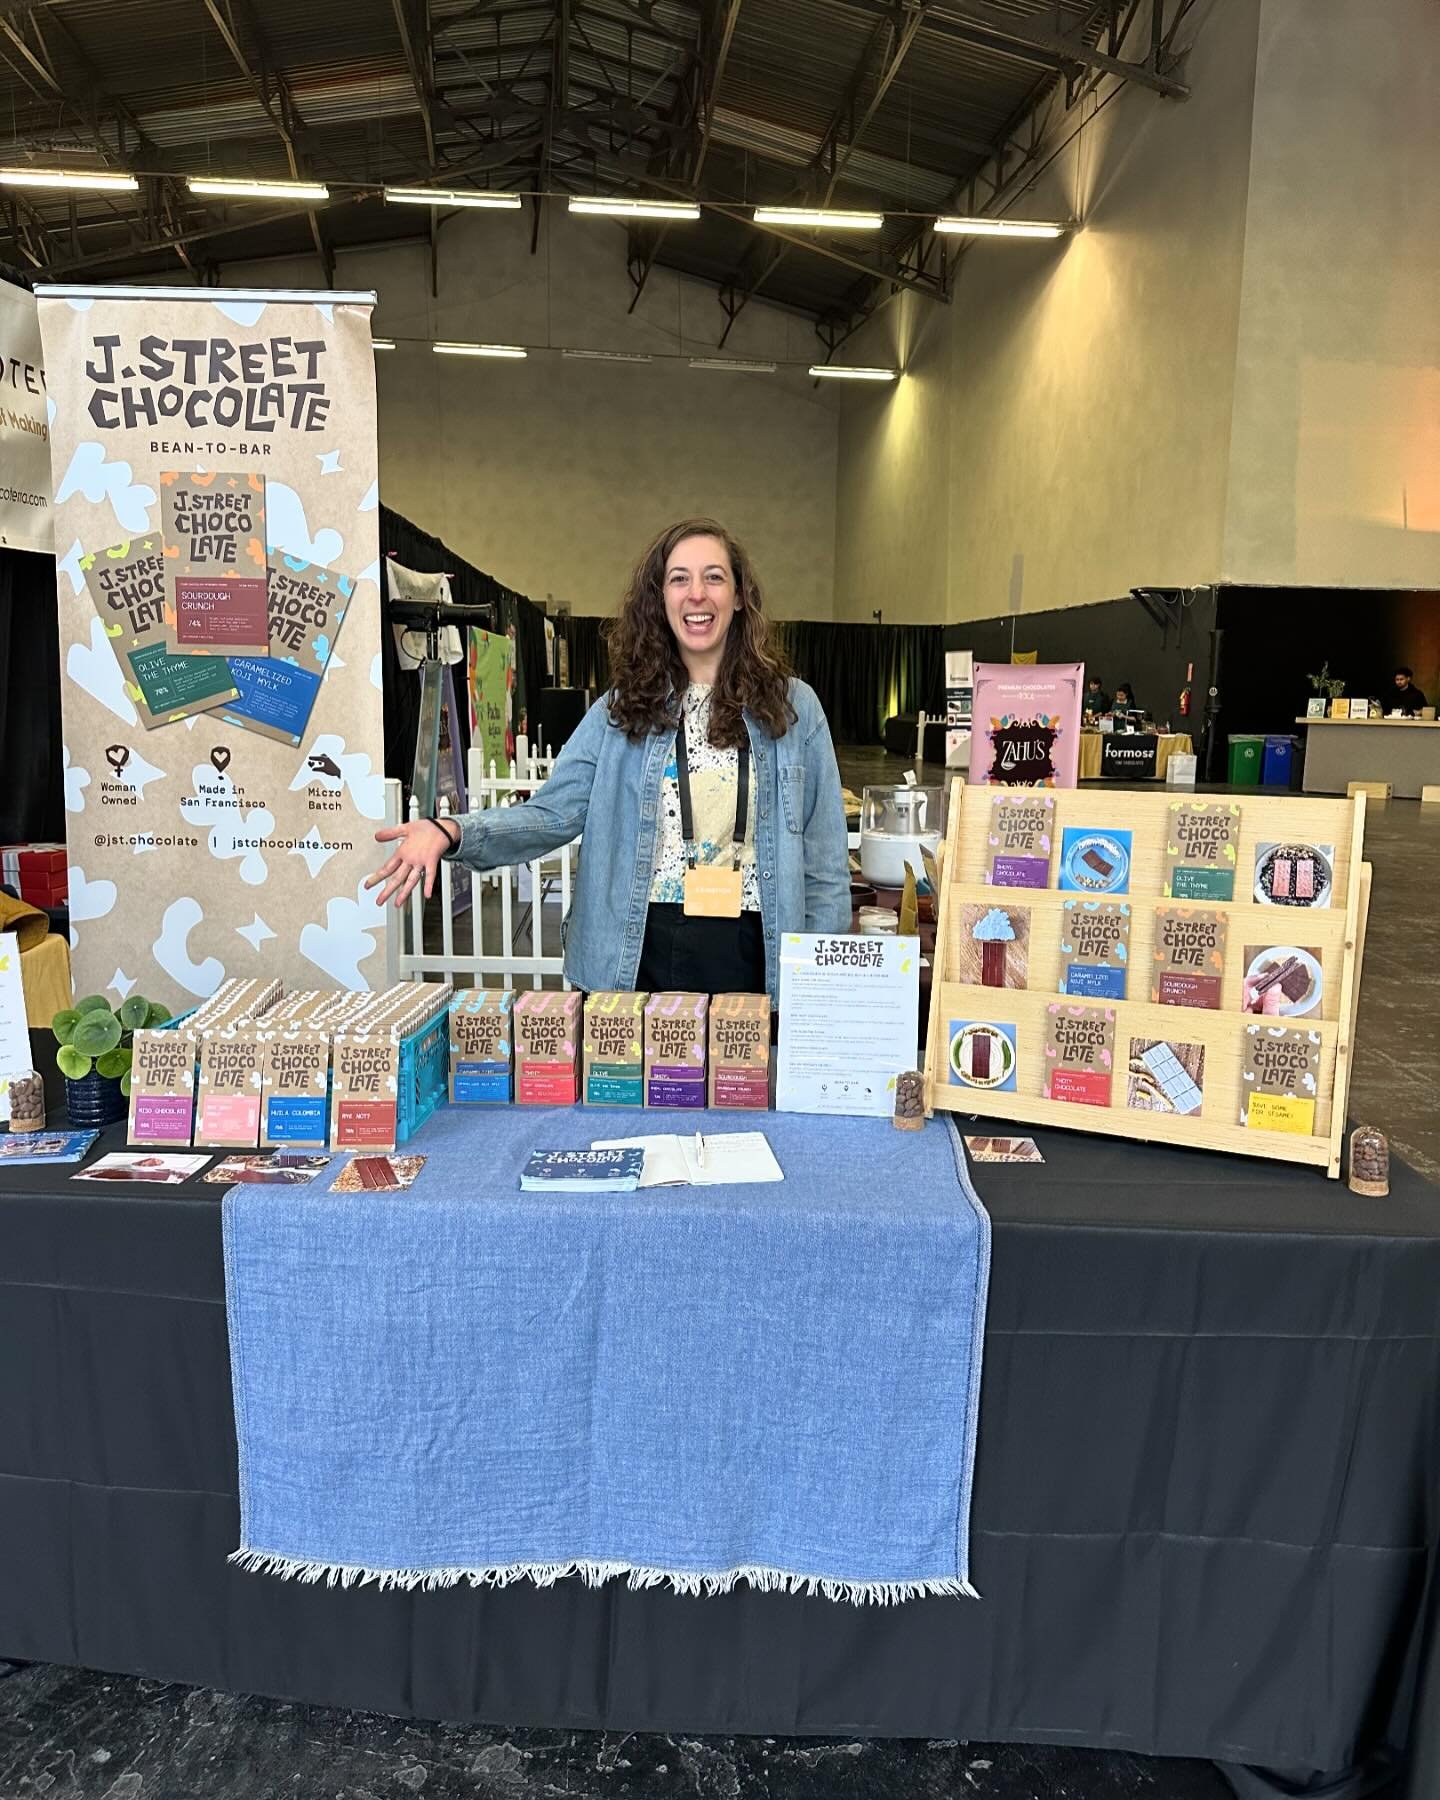 What a weekend @craftchocolateexperience! Thanks to all who came out and supported. A big highlight for me was to meet so many of you (new and existing fans) and so many chocolate makers from all over the world. 

It was so fun to be across from the 